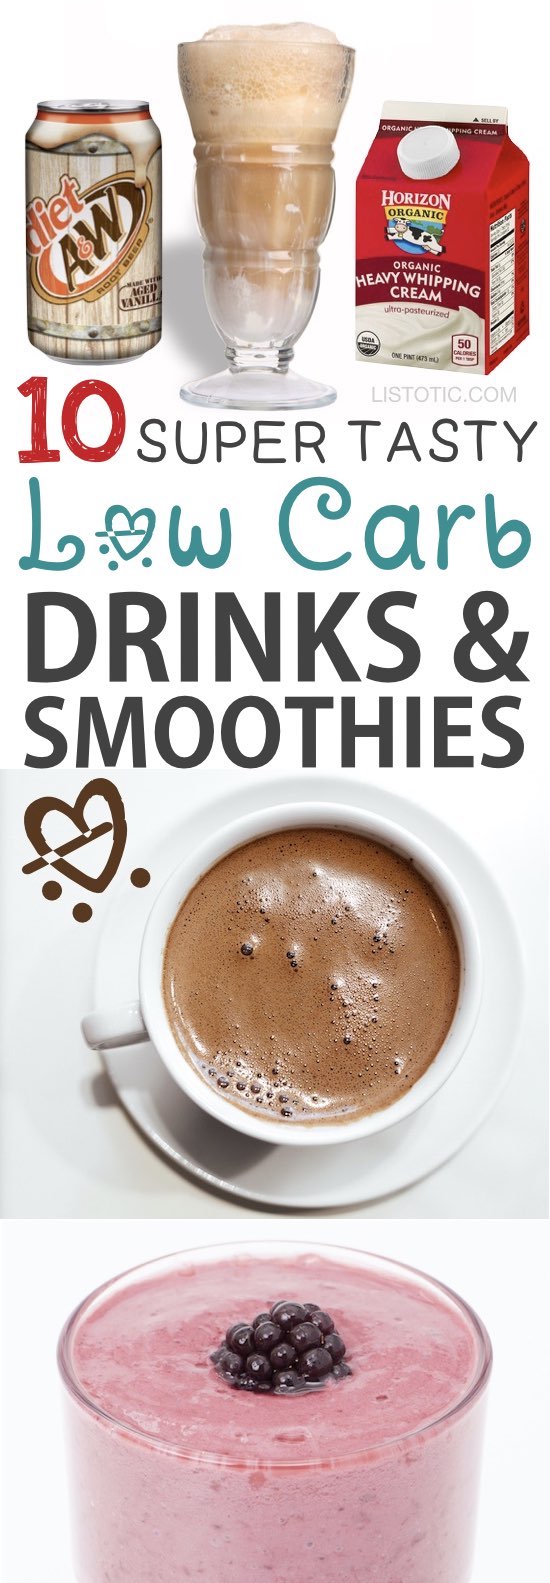 Low Carb Keto drinks, smoothies and snack recipes! Atkins and diabetic friendly. These are all easy with little ingredients! Listotic.com